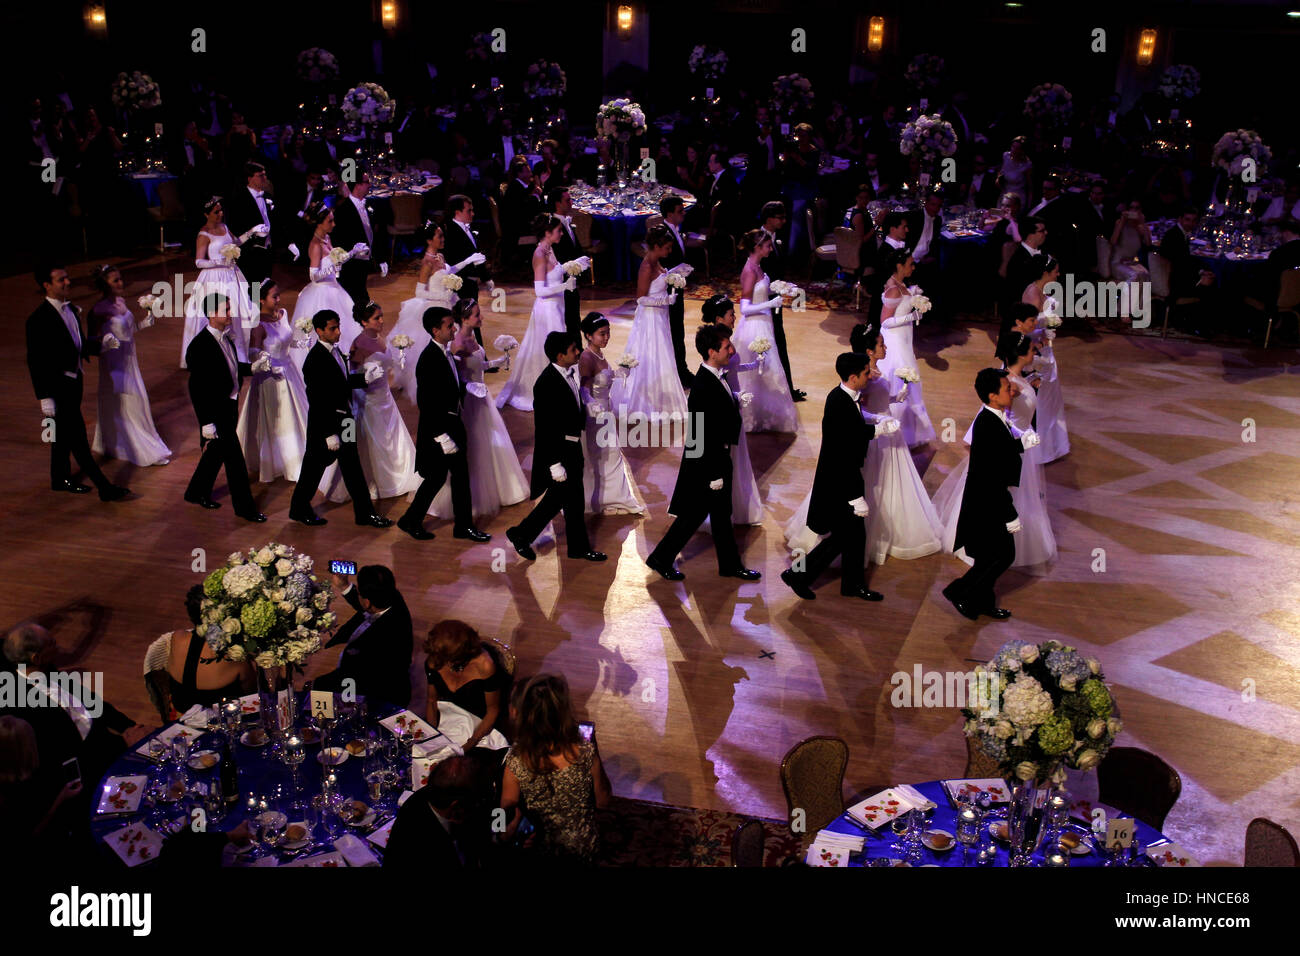 New York, United States. 10th Feb, 2017. Debutantes being escorted onto the dance floor during the 62nd Viennese Opera Ball at the Waldorf Astoria Hotel in New York City on February 10, 2017. The evening celebrated the 150th anniversary of Johann Strauss' Blue Danube Waltz and the gala event was to benefit the legacy of Leonard Bernstein, a project of the Jewish Museum in cooperation with the U.S. Friends of the Jewish Museum in Vienna. Credit: Adam Stoltman/Alamy Live News Stock Photo